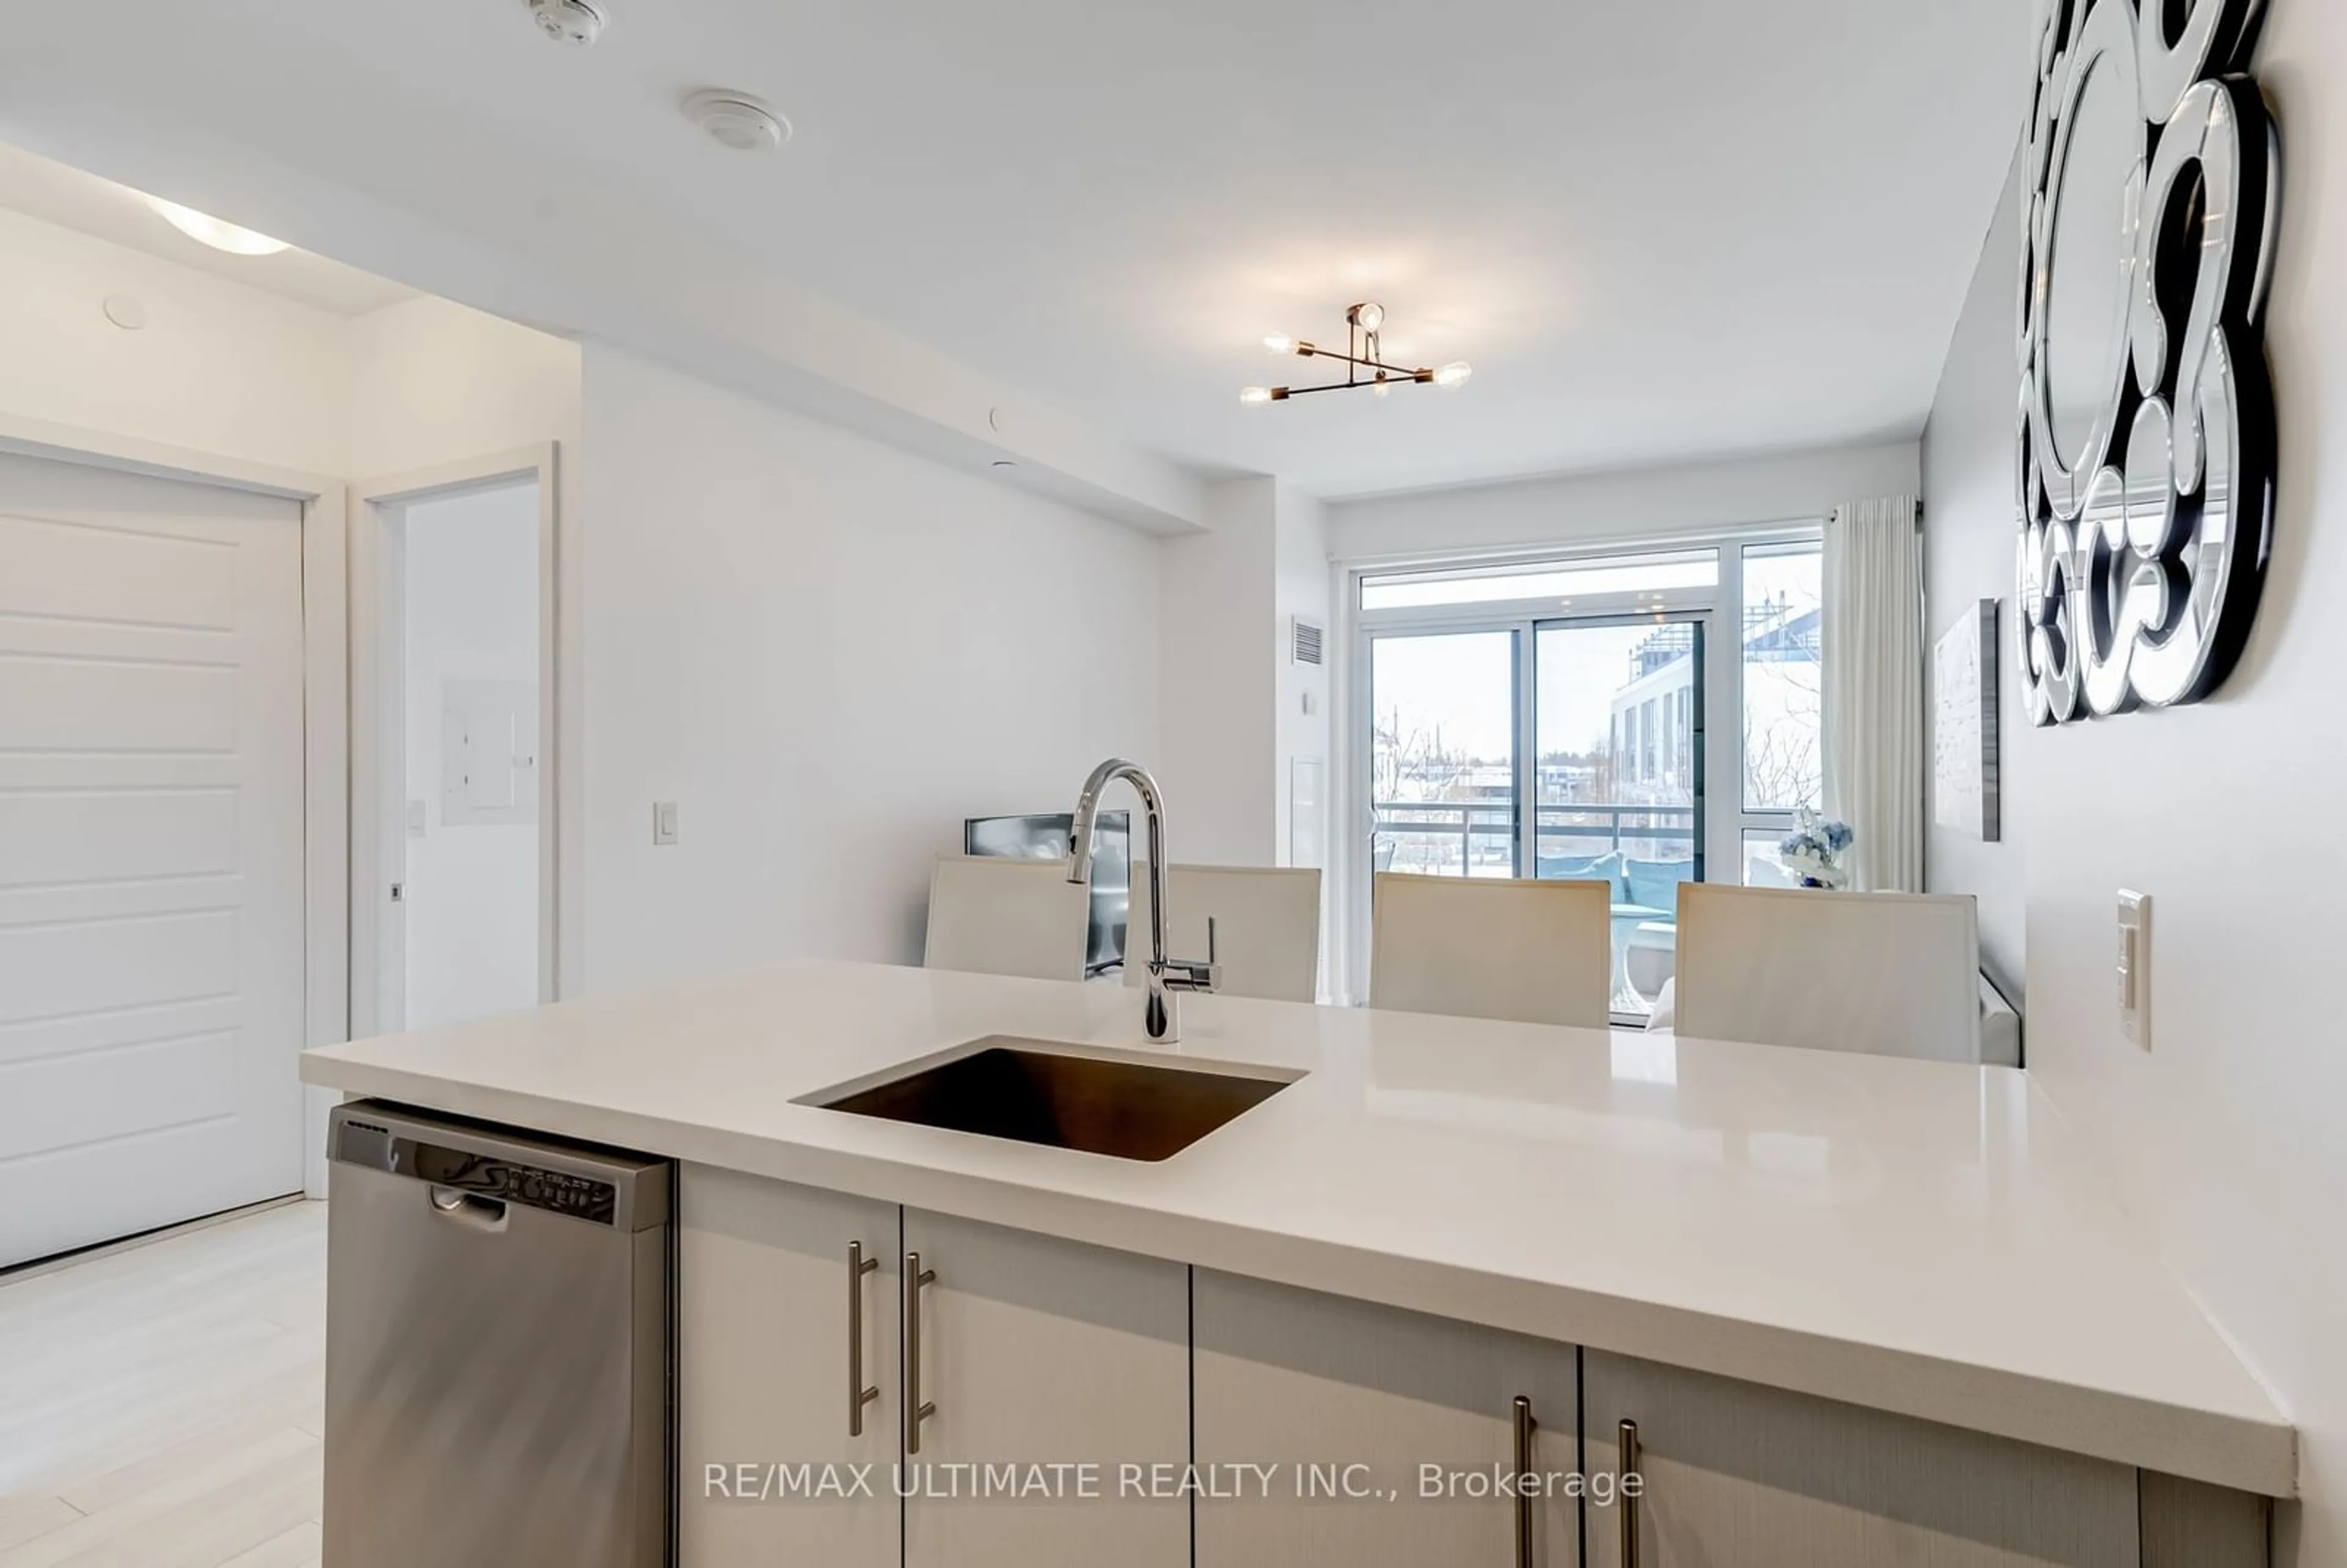 Standard kitchen for 301 Sea Ray Ave #C202, Innisfil Ontario L9S 0L8